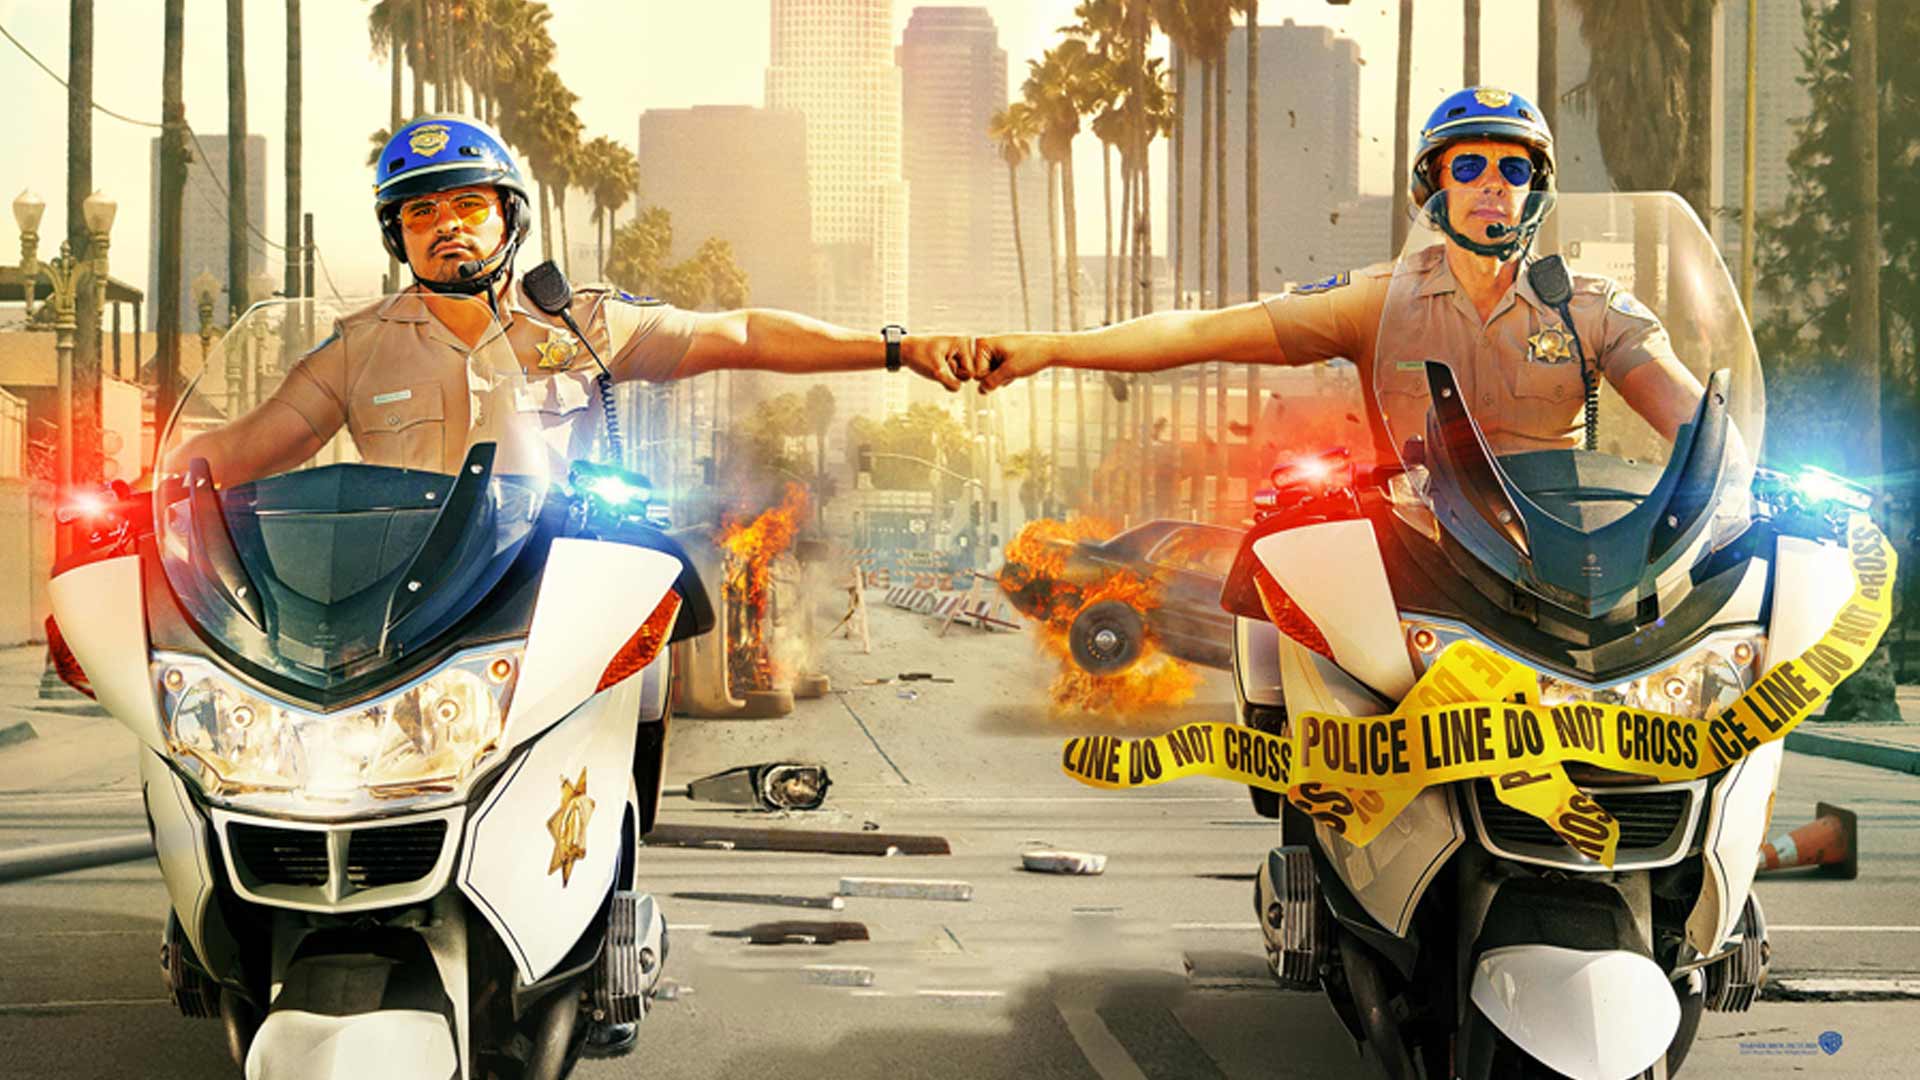 ‘CHiPs’ is good, mostly dumb fun with a lot of explosions